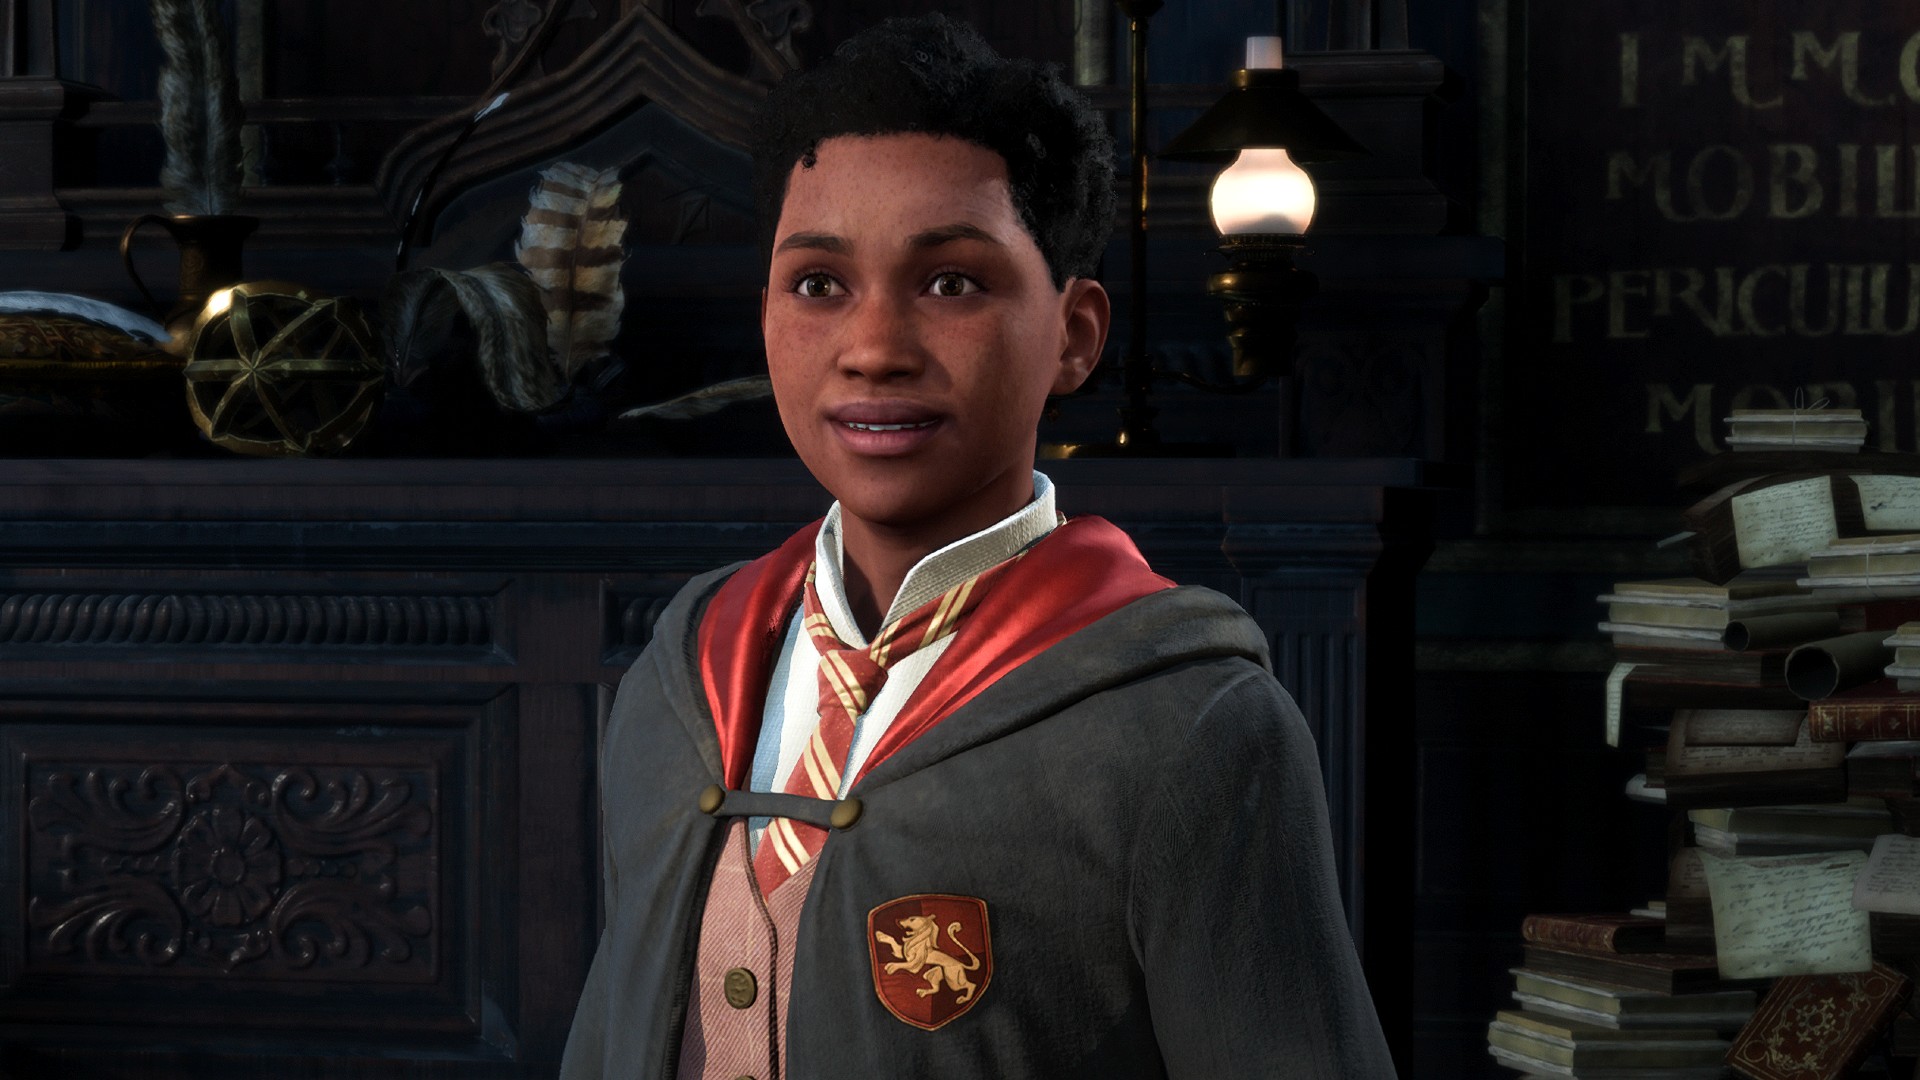 Hogwarts Legacy Review (PS5)